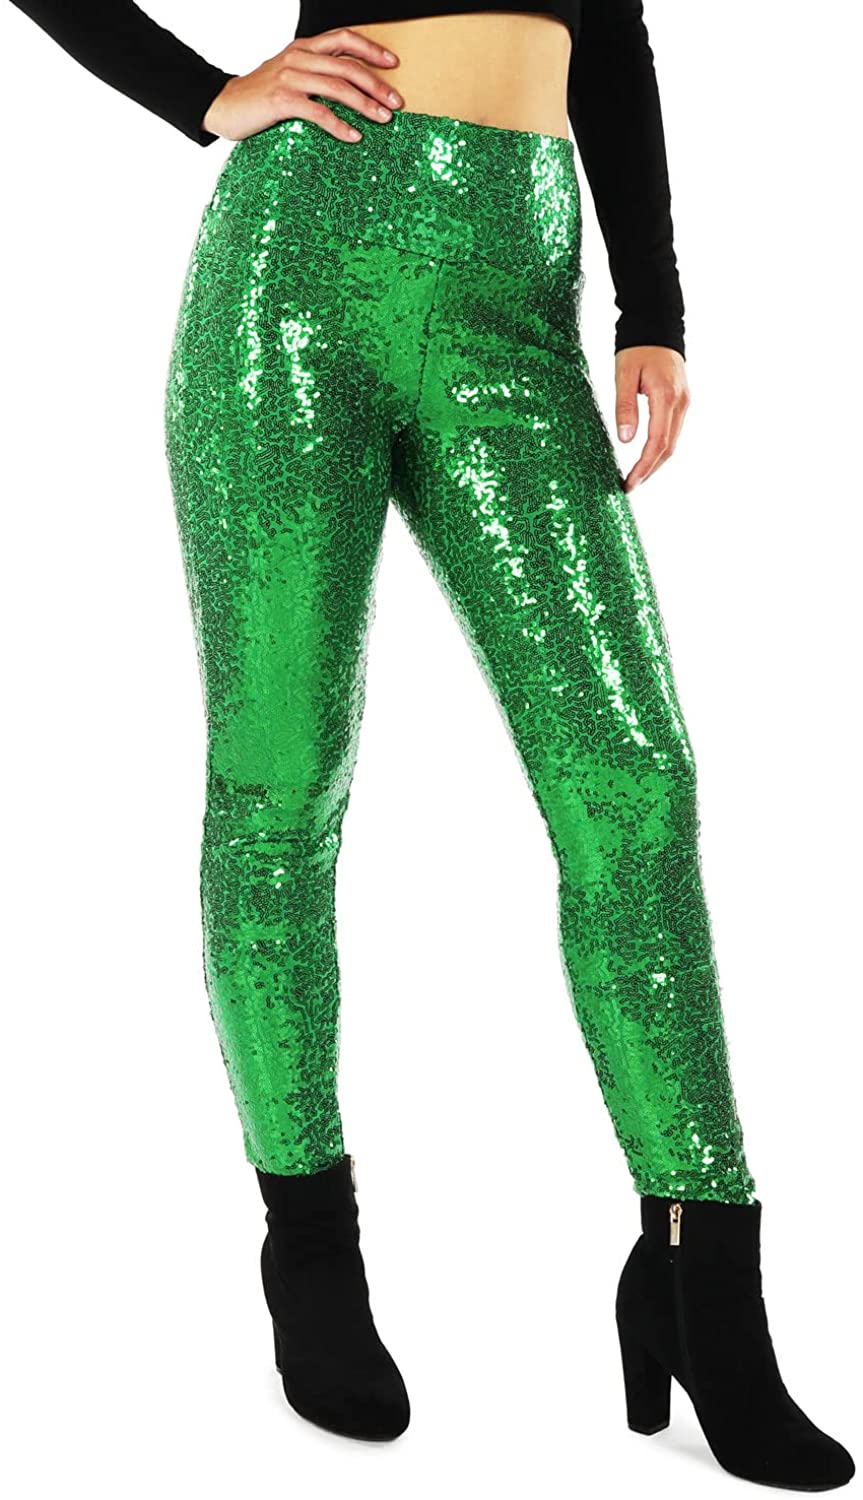 Tipsy Elves Shiny Sequin Leggings for Women for Holiday Outfits and Beyond